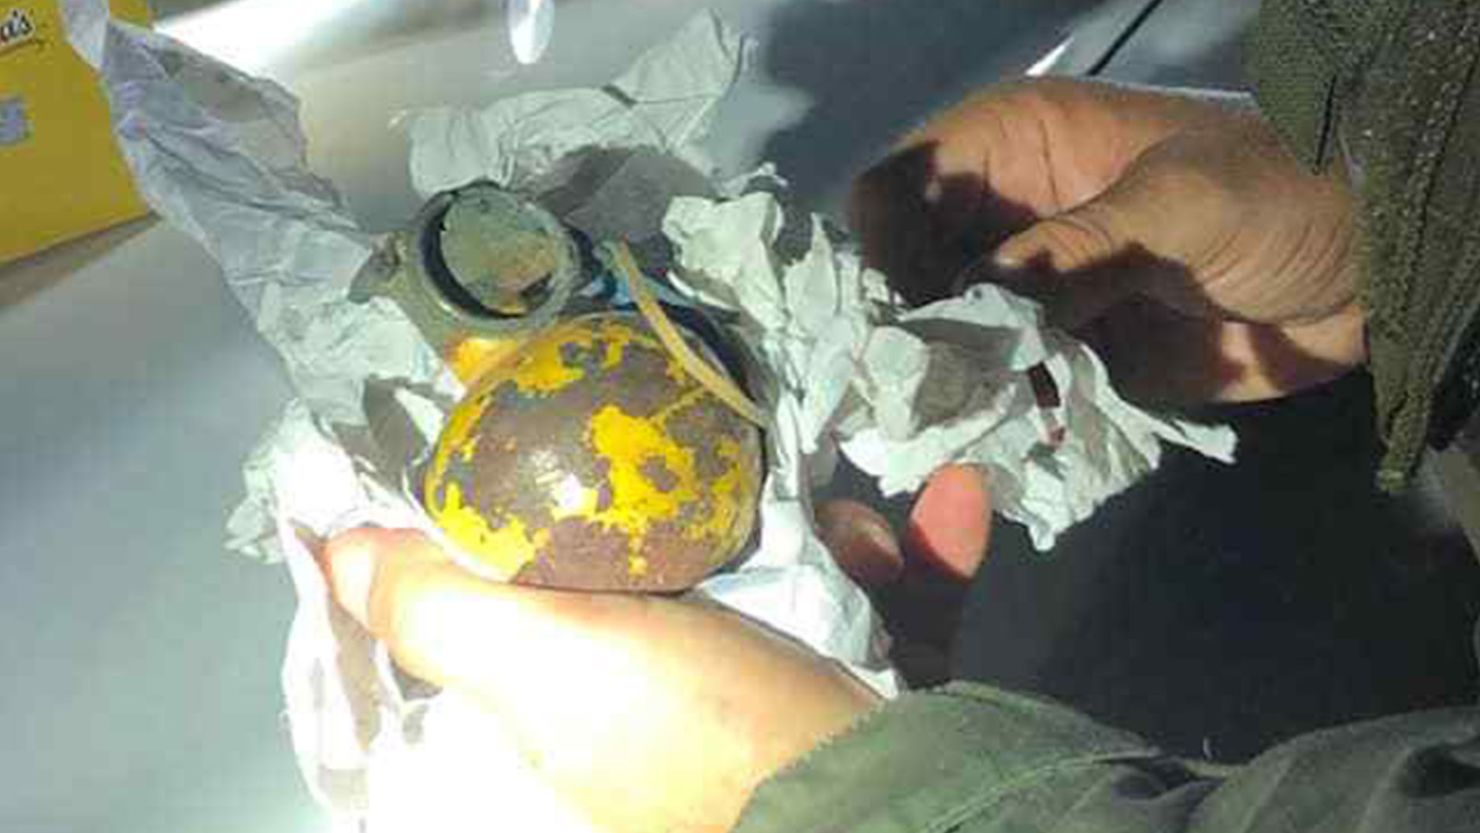 Grenade found during traffic stop in DeSoto County, Florida.